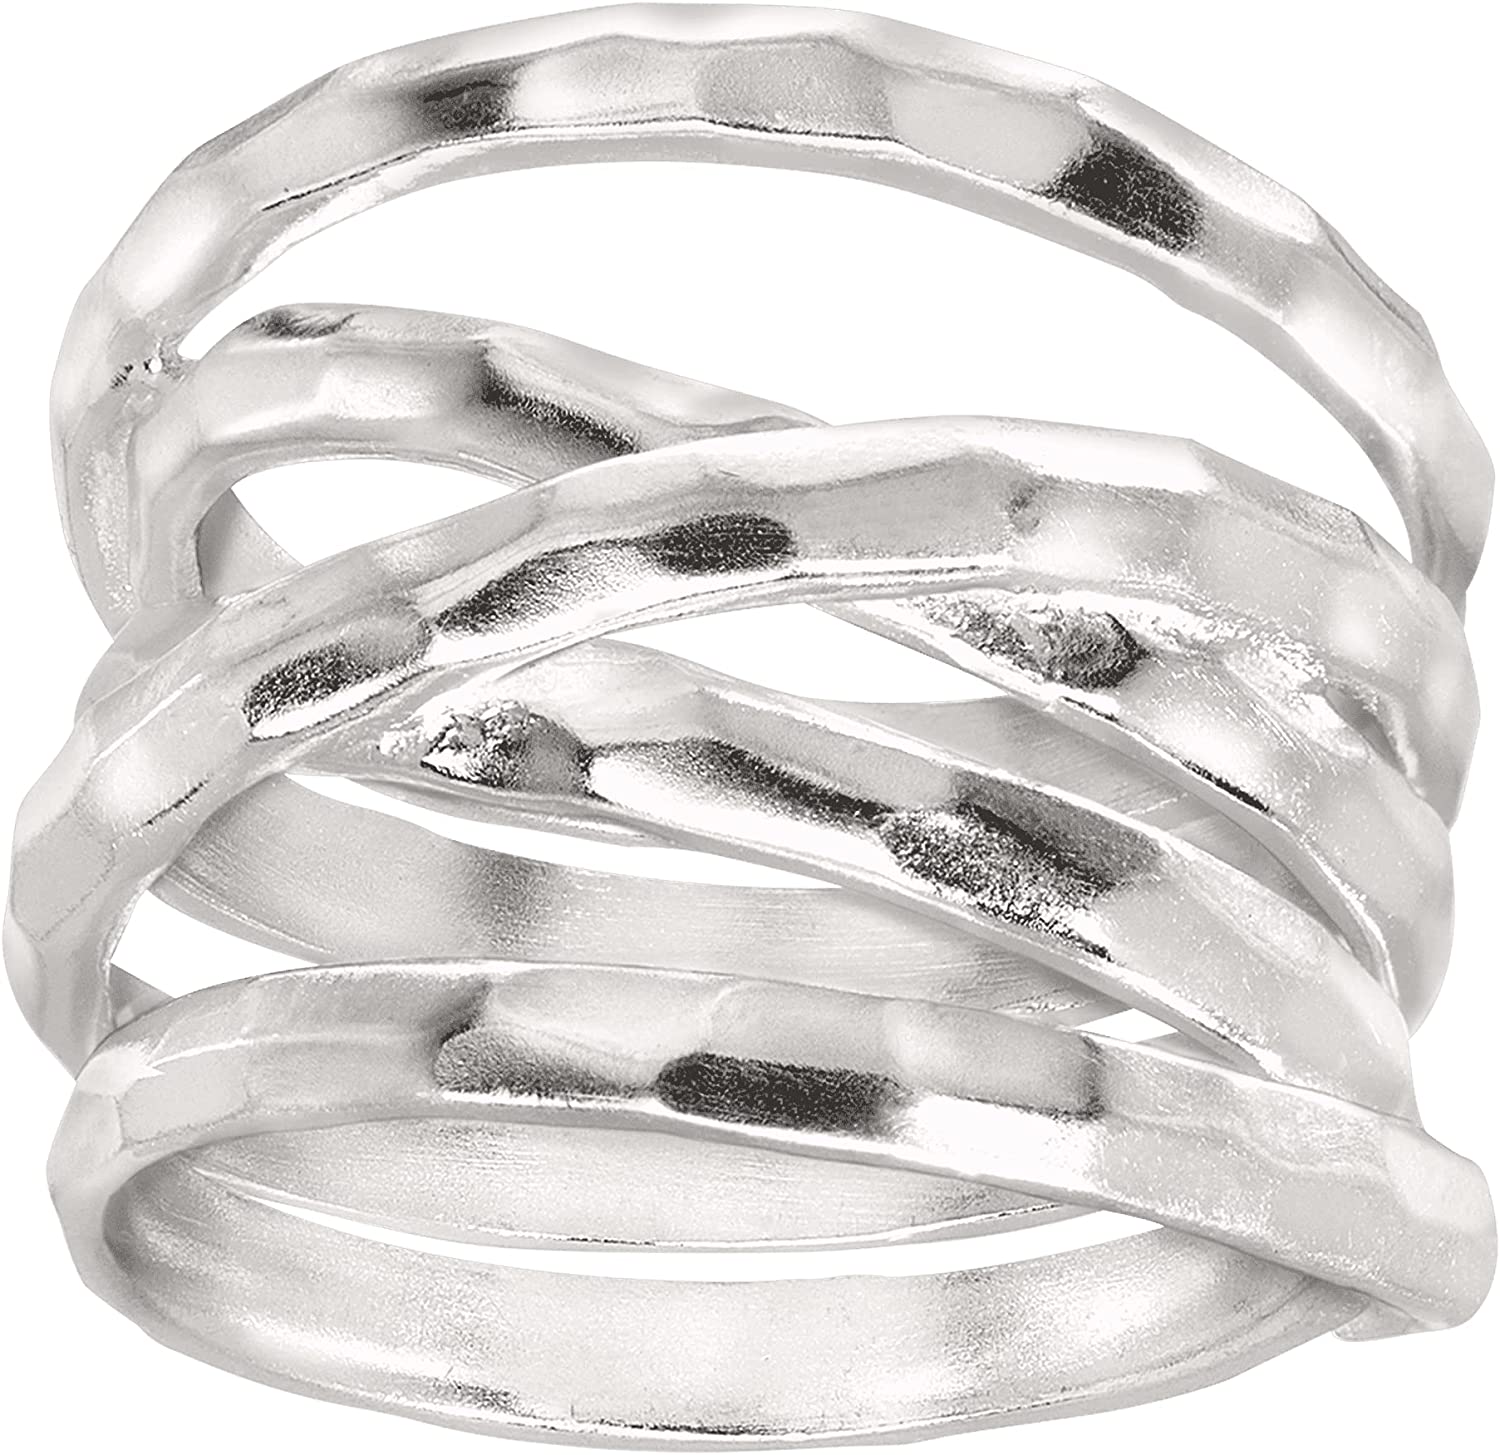 Silpada 'Wrapped Up' Overlapping Textured Band Ring in Sterling Silver